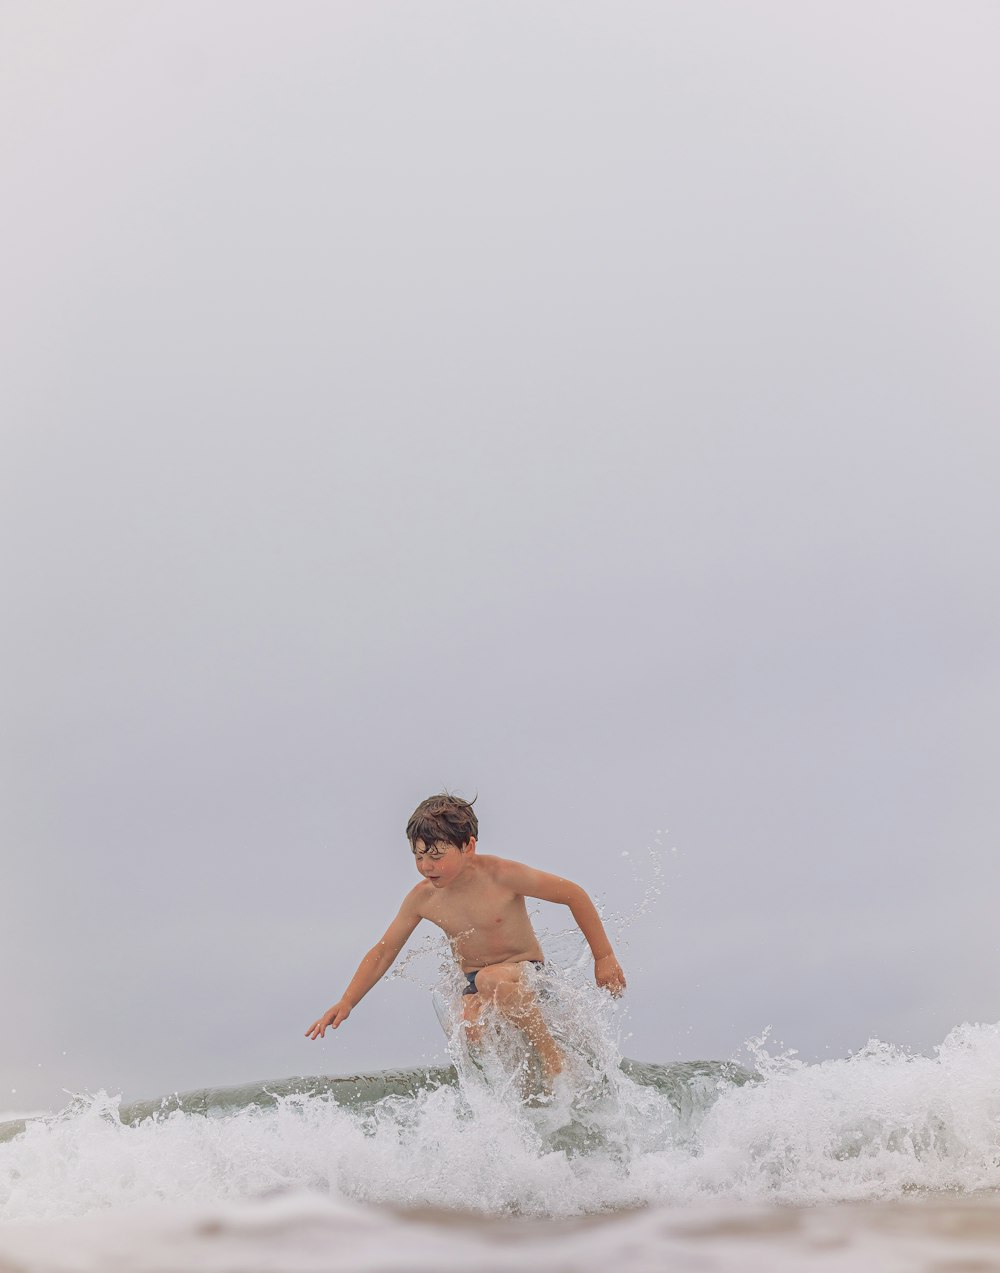 a young man riding a wave on top of a surfboard